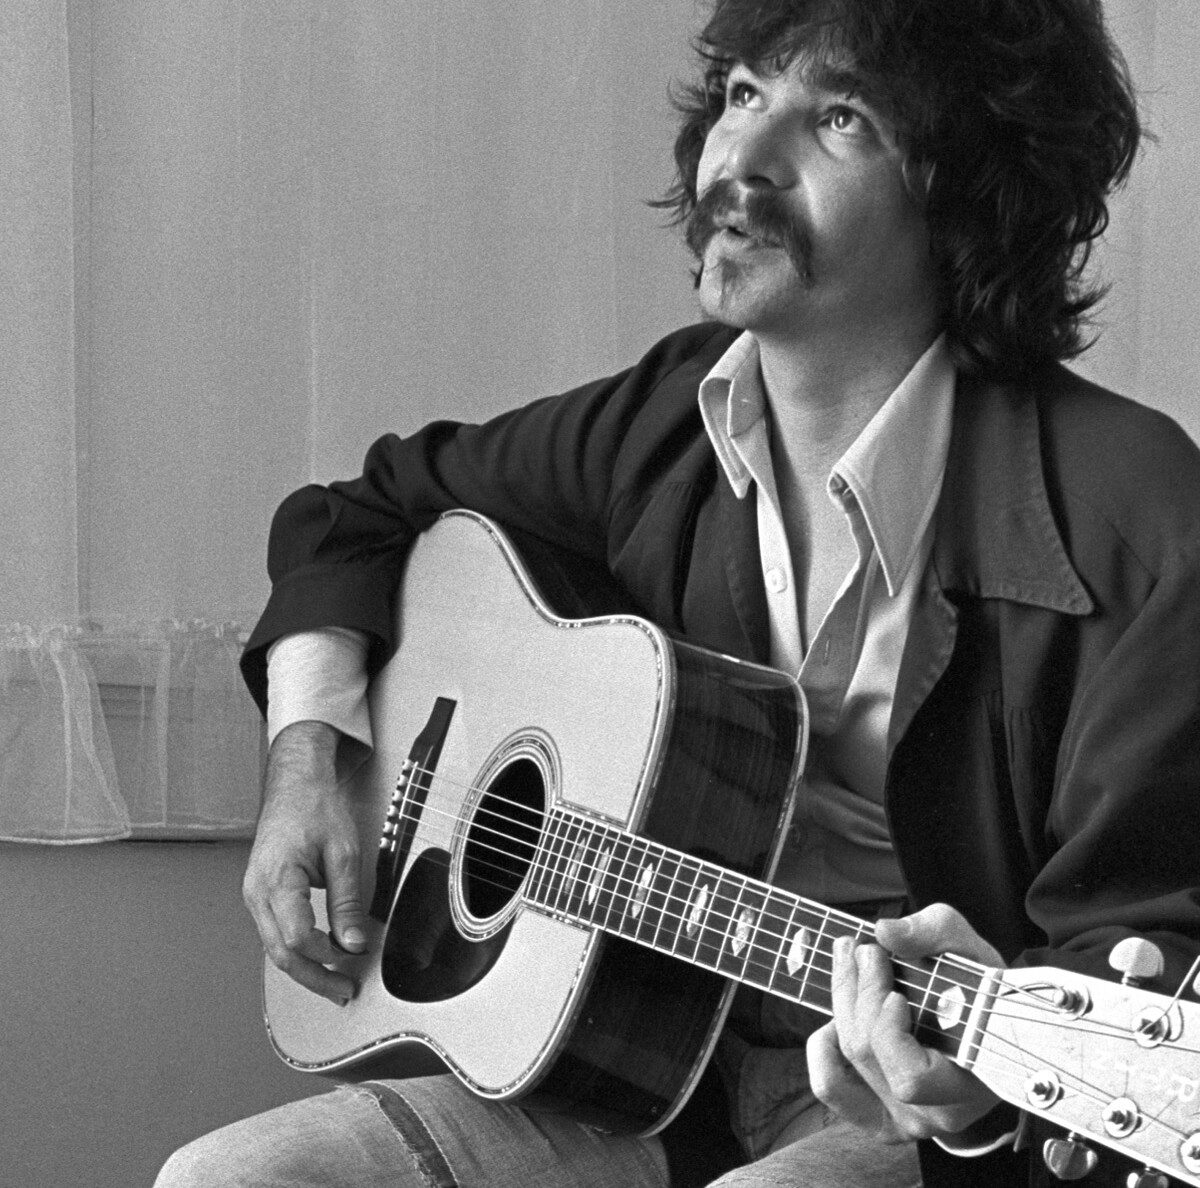 John Prine at an apartment on Briarcliff Road during John Prine on campus of Georgia State College - November 12, 1975 at Georgia State College in Atlanta, Georgia, United States. (Photo by Tom Hill/WireImage)